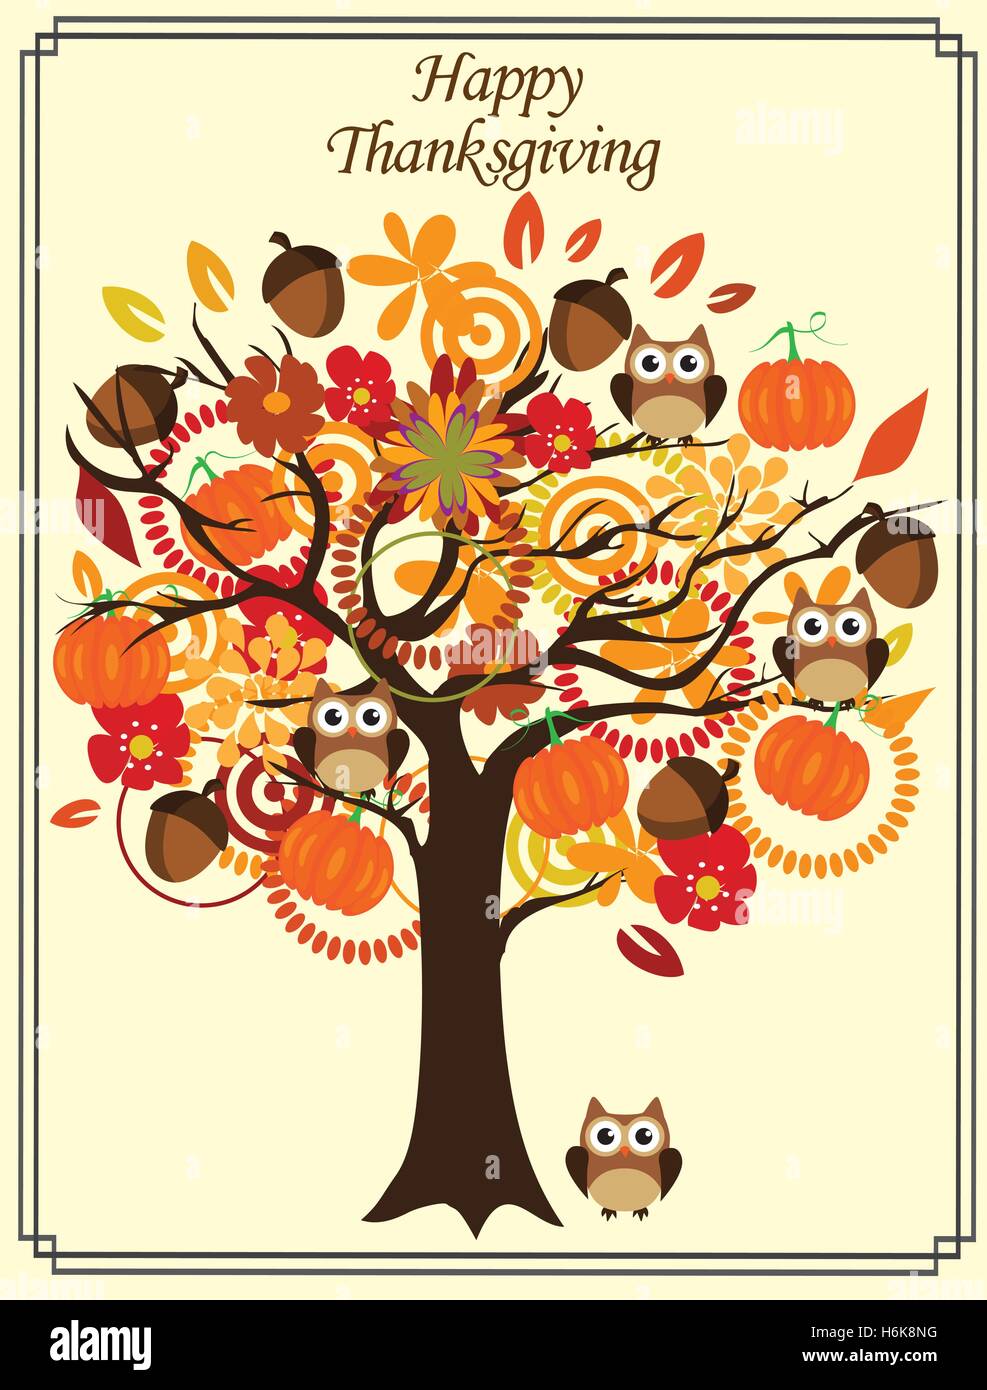 vector illustration of a thanksgiving day card with tree, owls, pumpkins Stock Vector